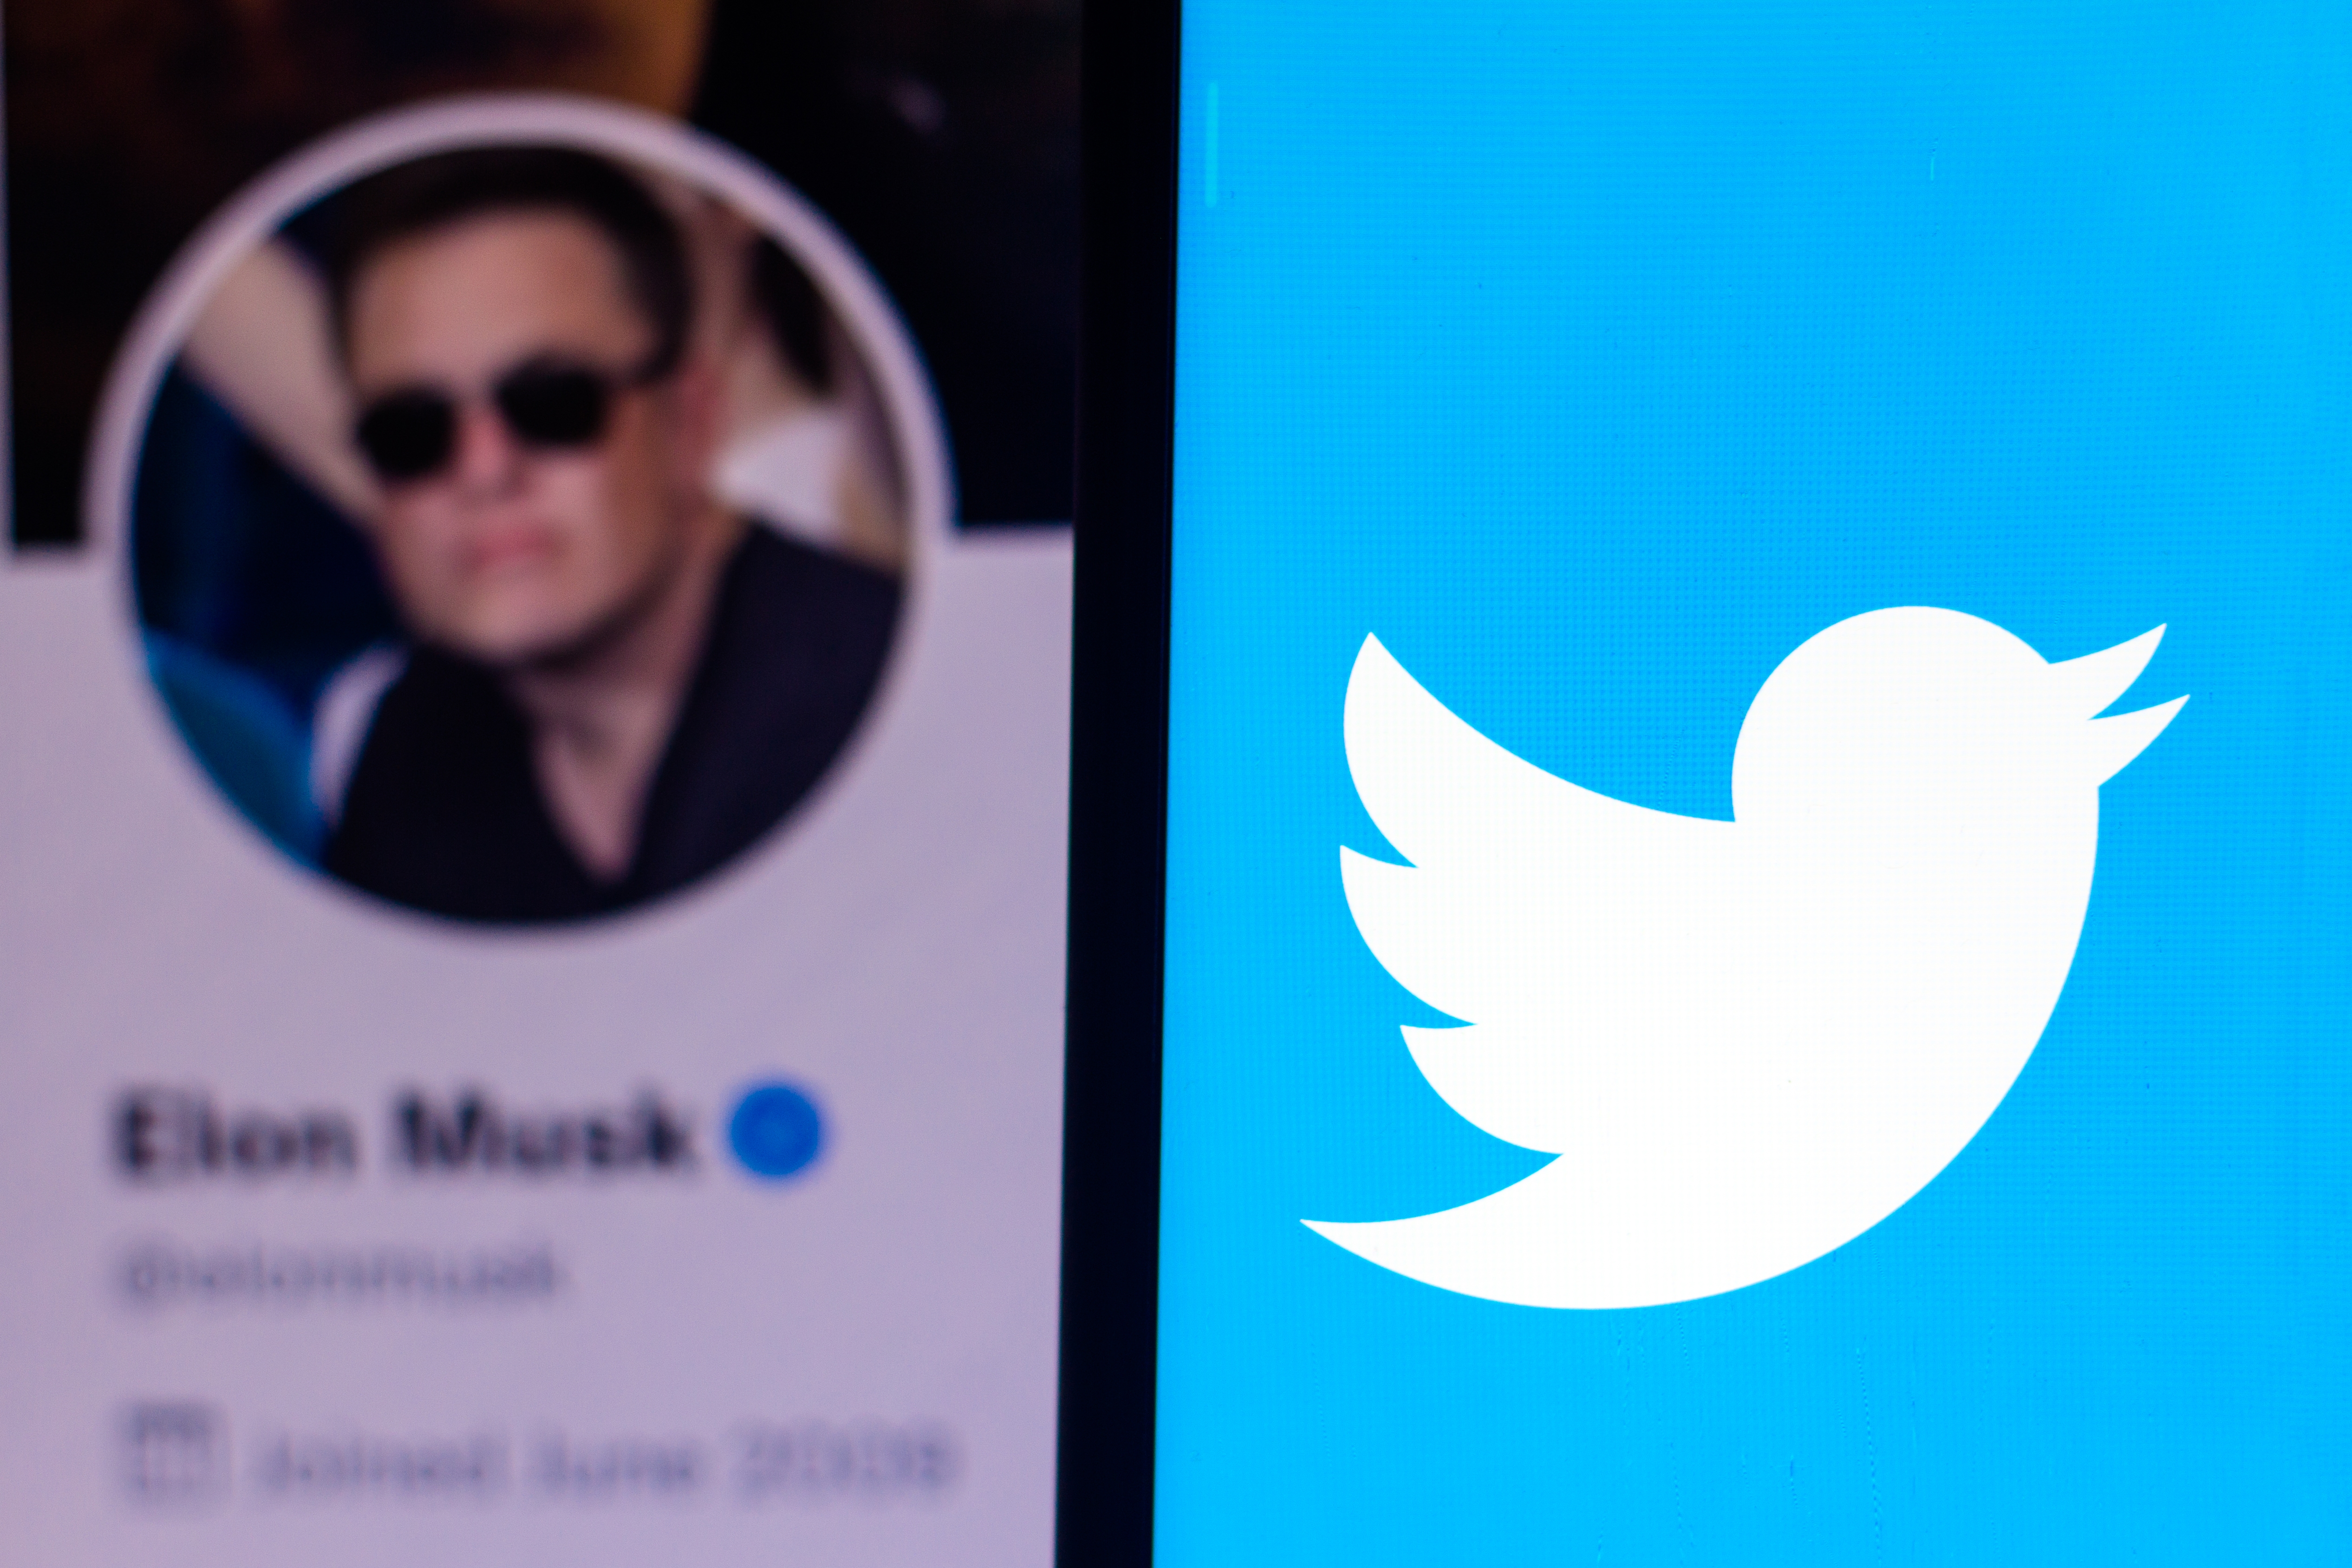 Elon Musk Looks to Buy Twitter Outright